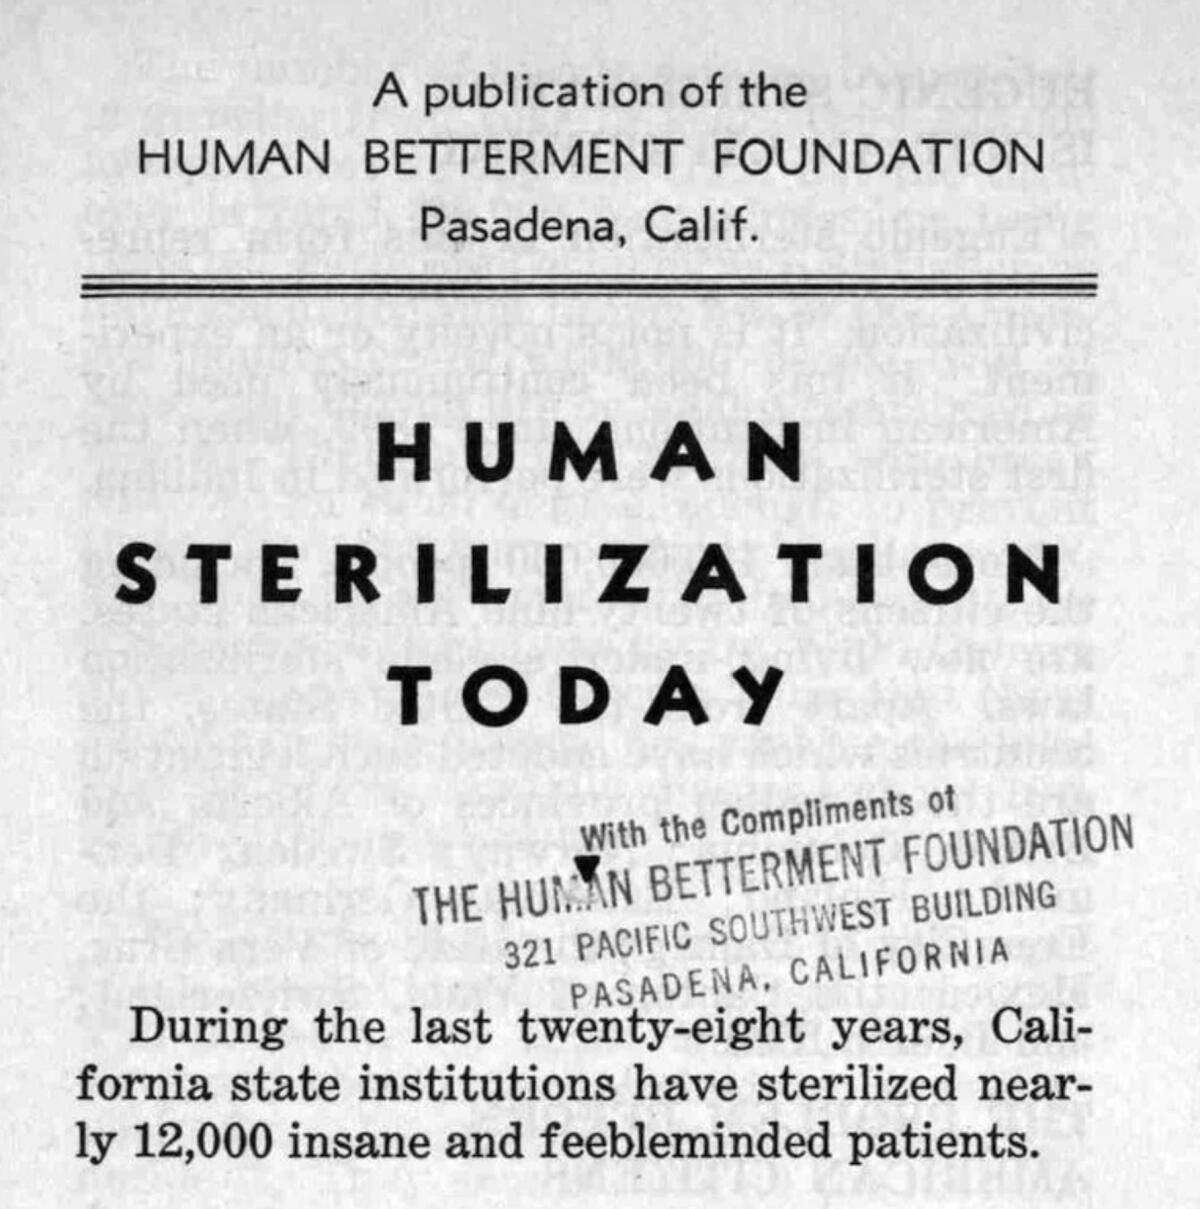 The Human Betterment Foundation, of which Caltech's Robert Millikan was a trustee, touted forced sterilization in California.